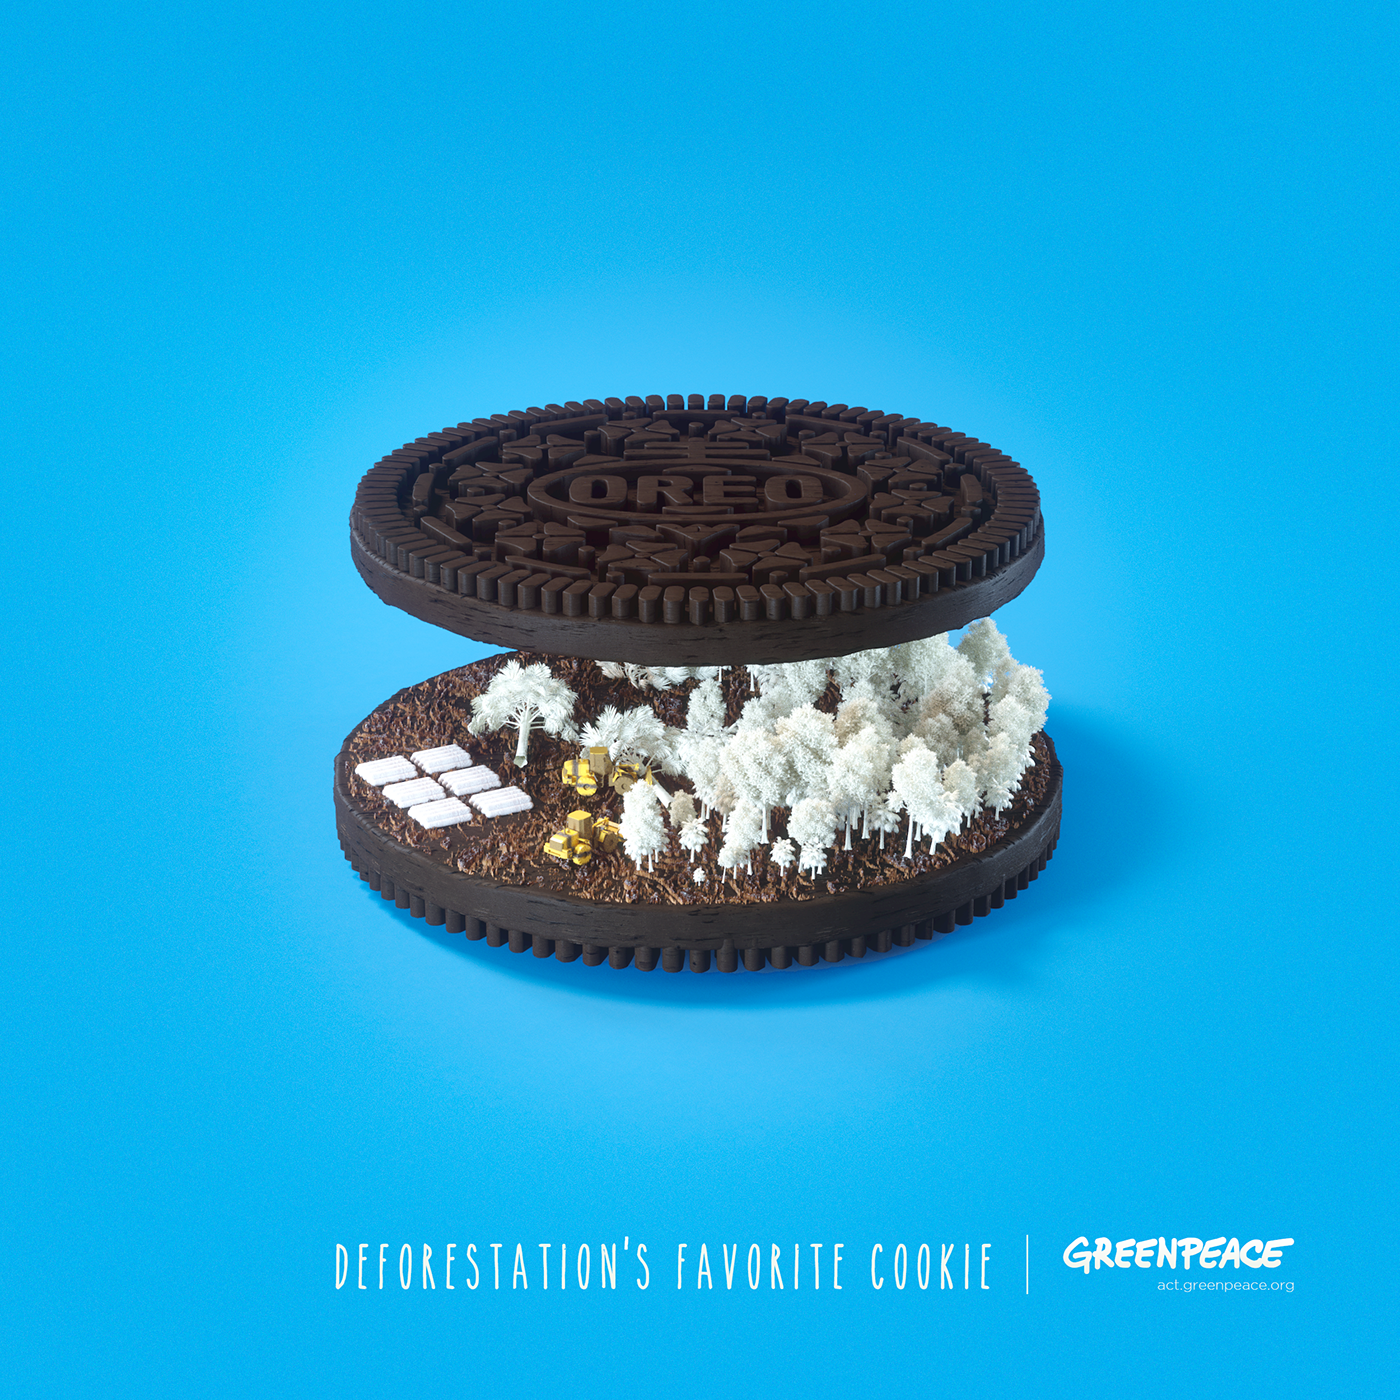 forest oreo cookie social CGI protest art direction  Palm Oil cream animals